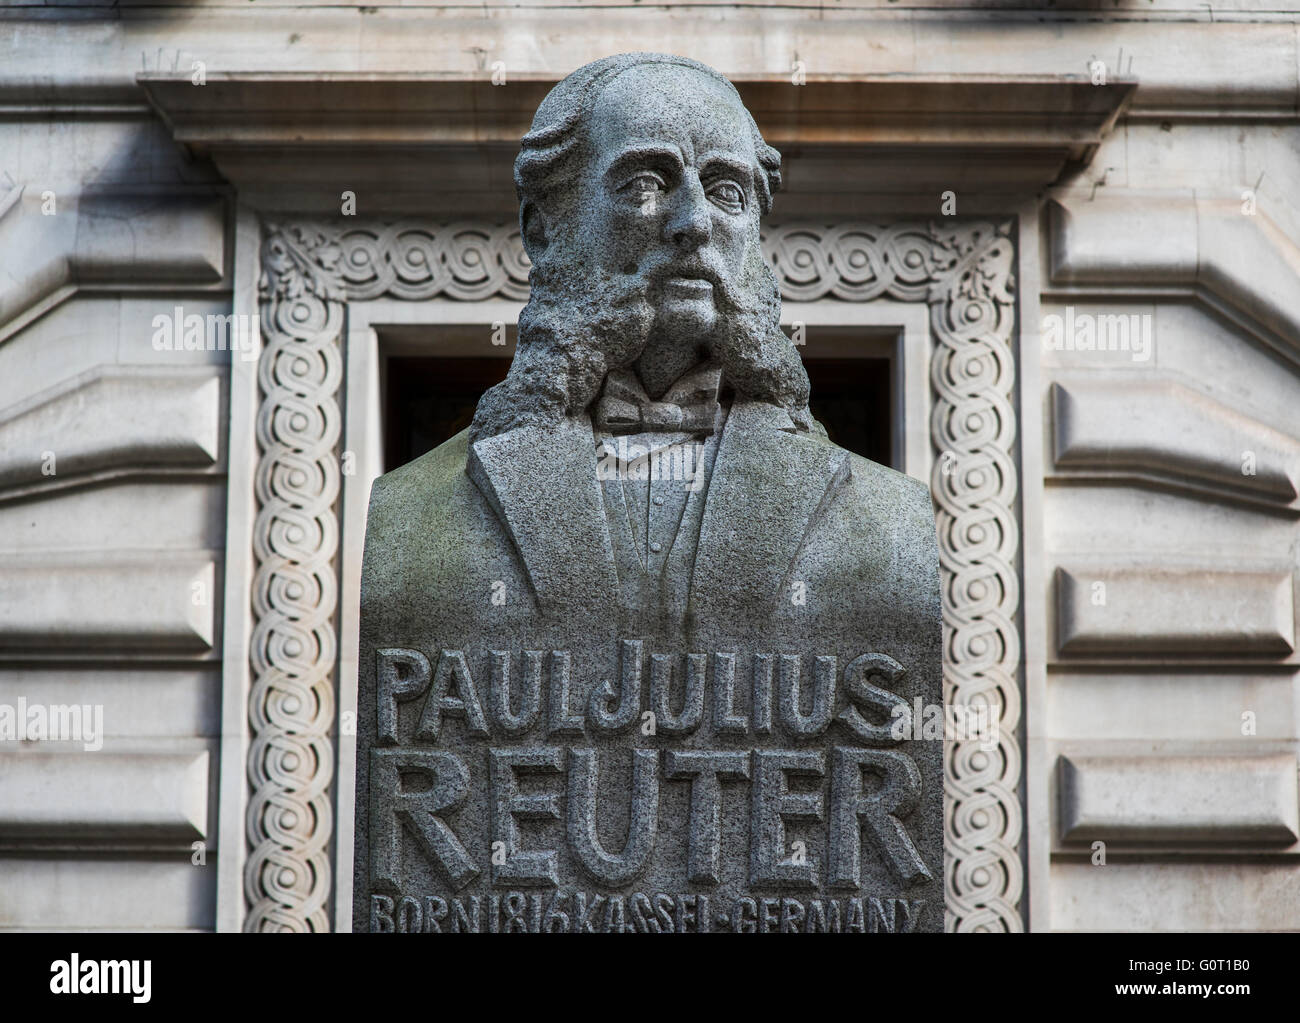 City of London, London, England,UK. 19 April 2016Statue of Paul Julius Reuter, founder of Reuters News Agency in London Exchange.Paul Julius Freiherr von Reuter (Baron de Reuter) (21 July 1816 – 25 February 1899), a German entrepreneur, pioneer of telegraphy and news reporting was a reporter and media owner, and the founder of Reuters News Agency since 2008 part of the Thomson Reuters conglomerate. Stock Photo